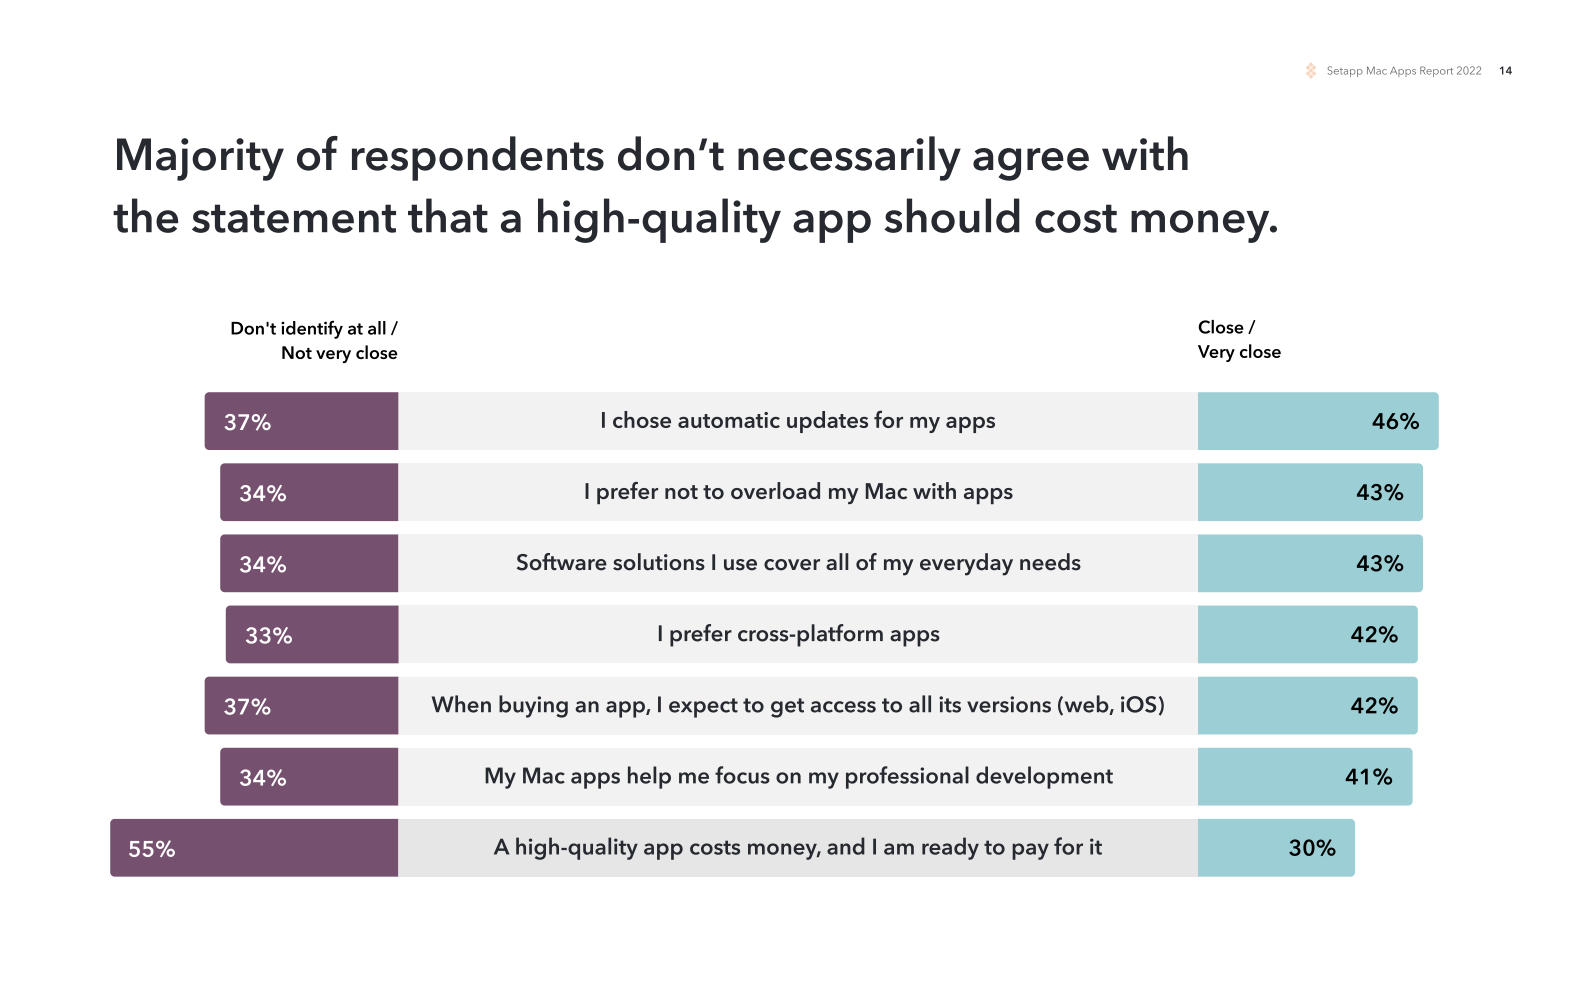 reasons why a high-quality app should cost money